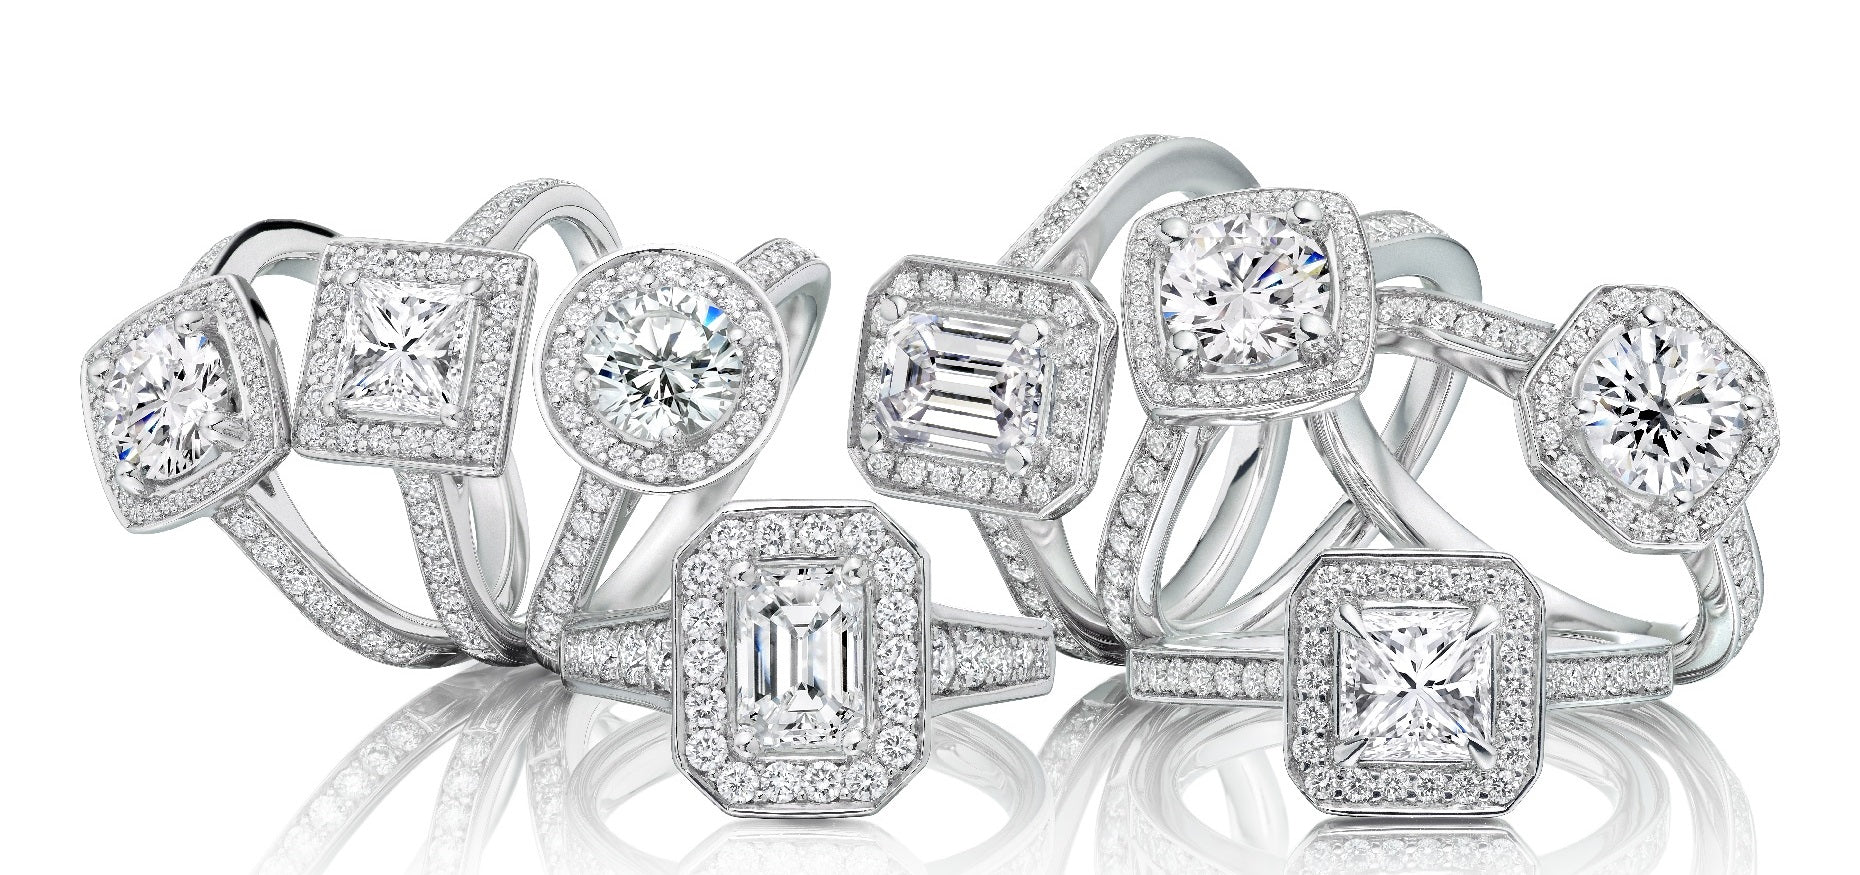 Halo Engagement Rings are rings with a centre stone encircled by smaller diamonds or gemstones